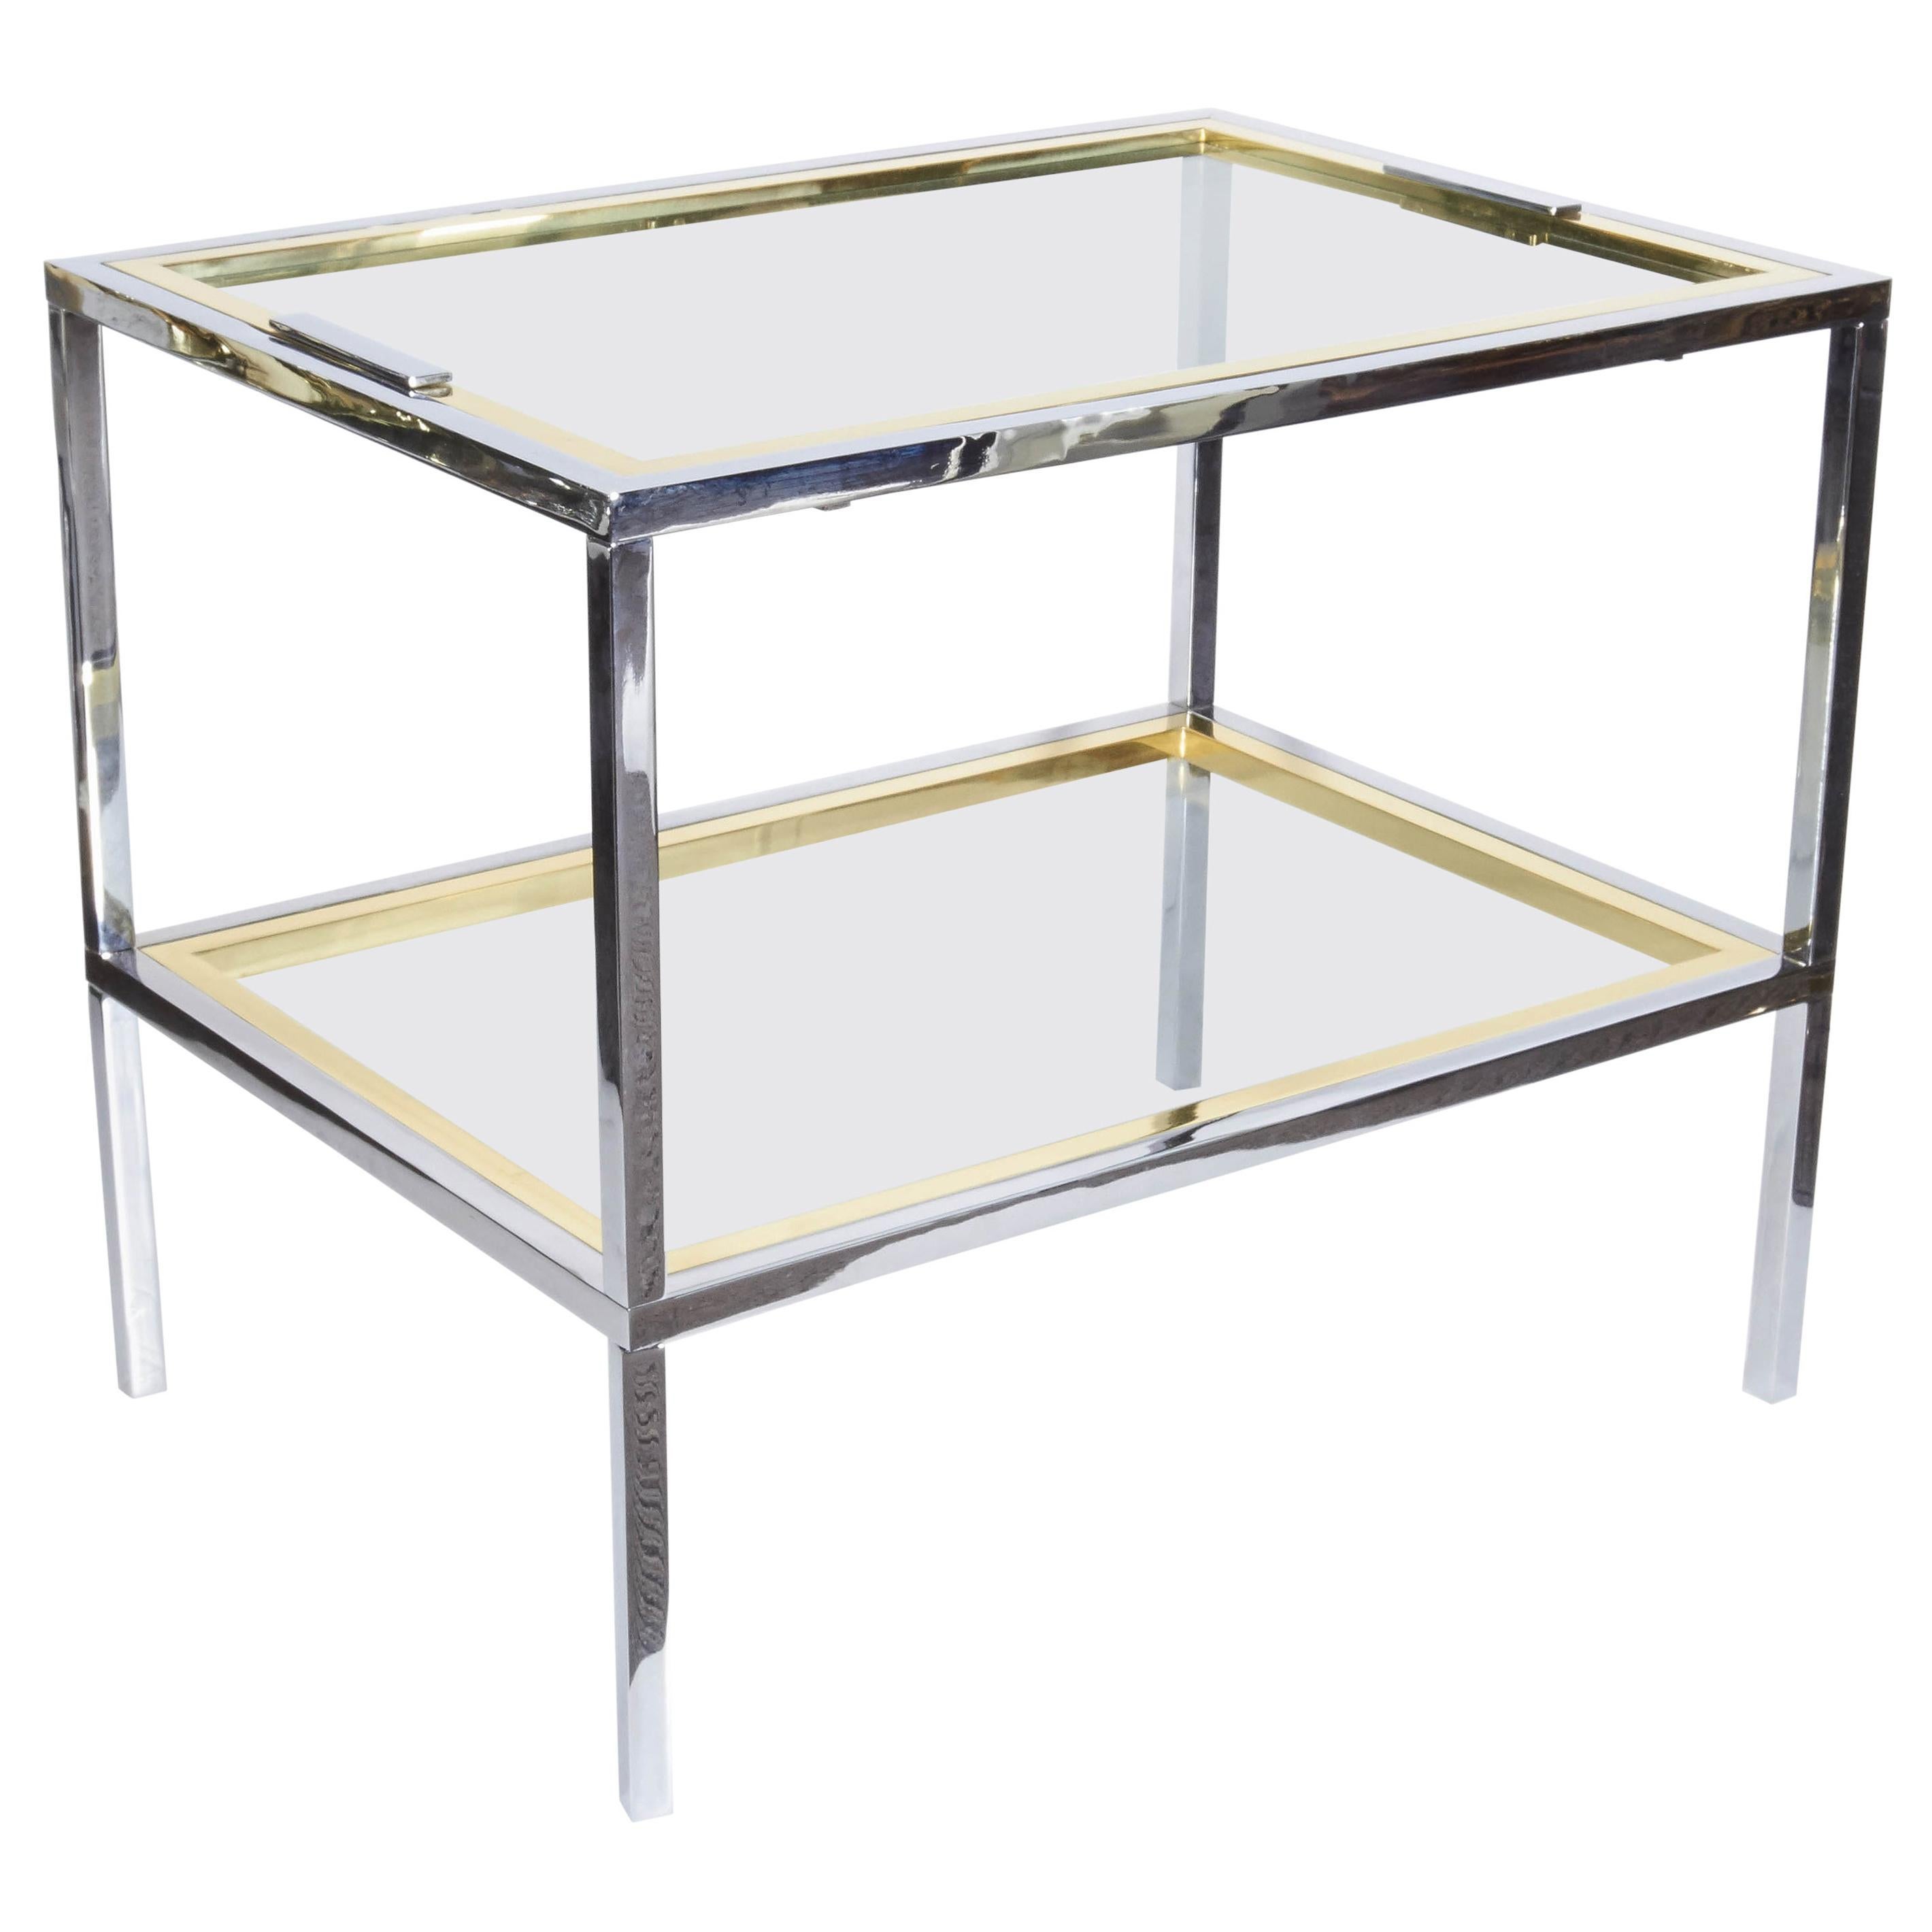 1970s Modern Italian Chrome, Brass and Glass Tray Table For Sale